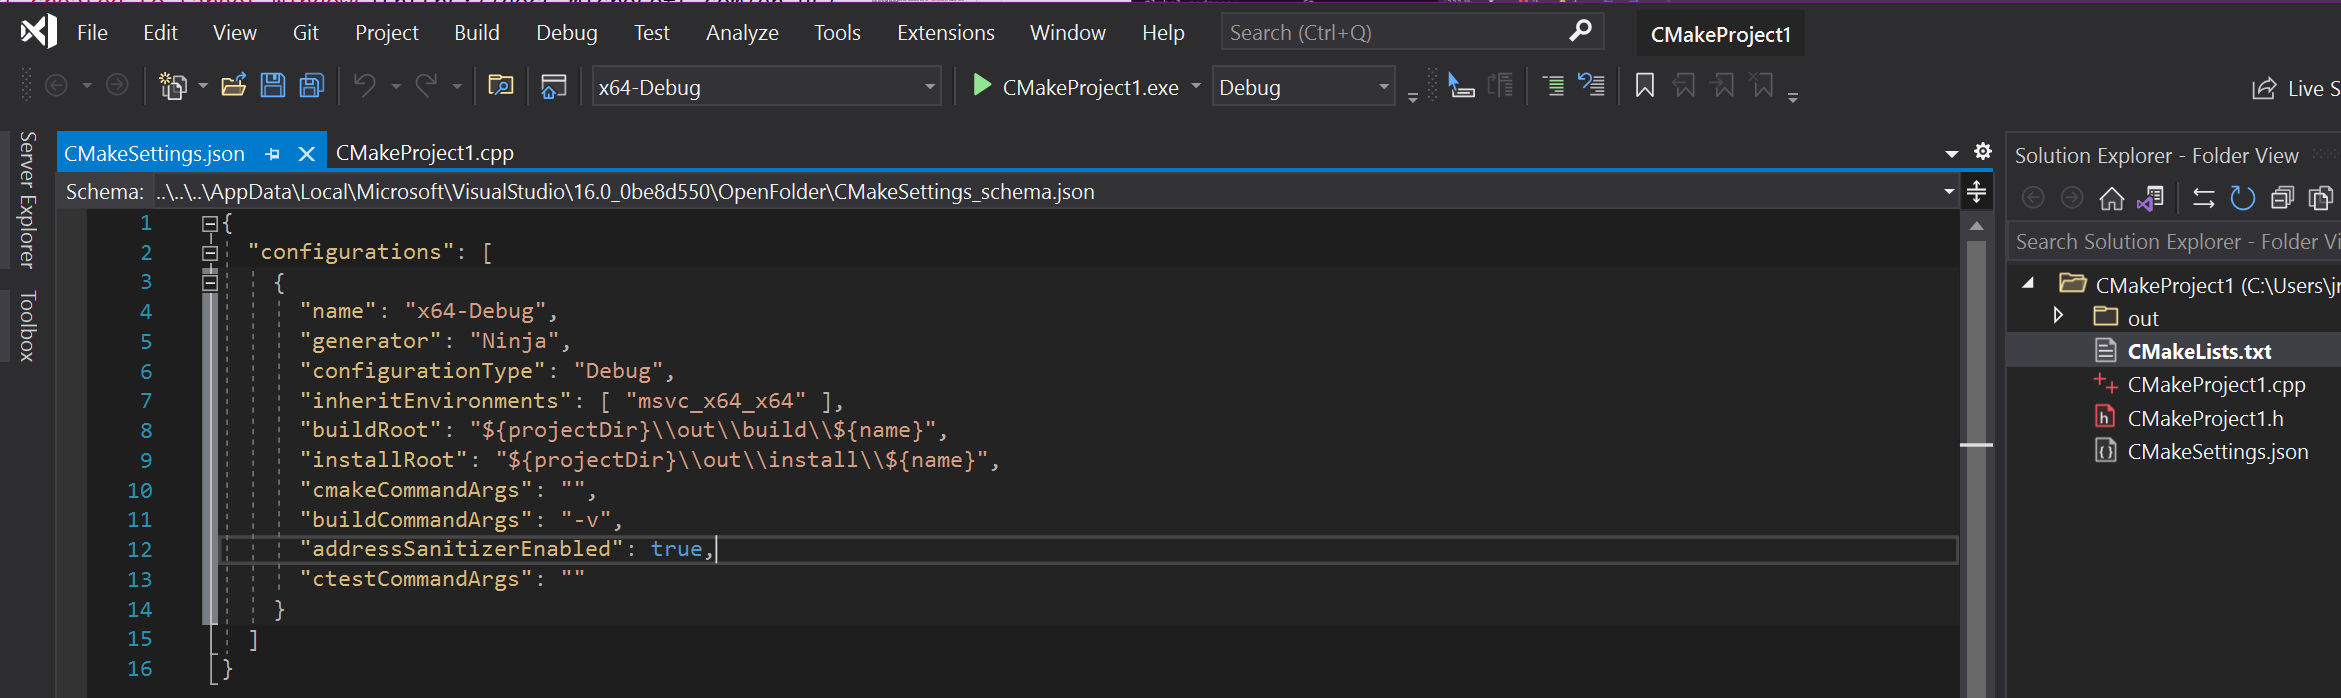 Screenshot of the text editor view of CMakeSettings.json.